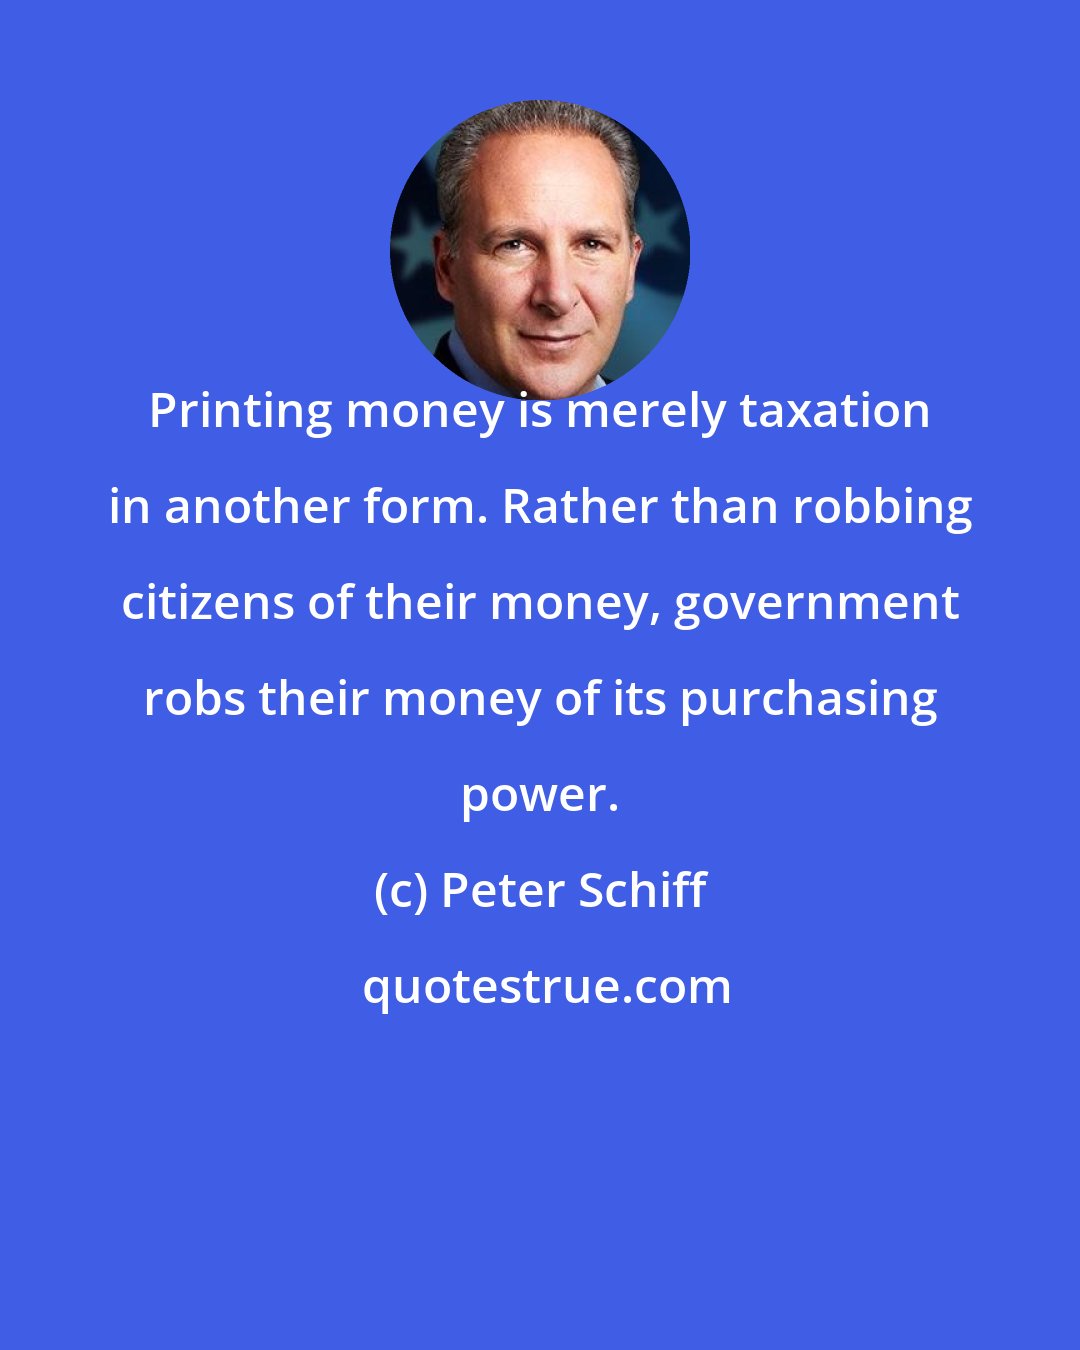 Peter Schiff: Printing money is merely taxation in another form. Rather than robbing citizens of their money, government robs their money of its purchasing power.